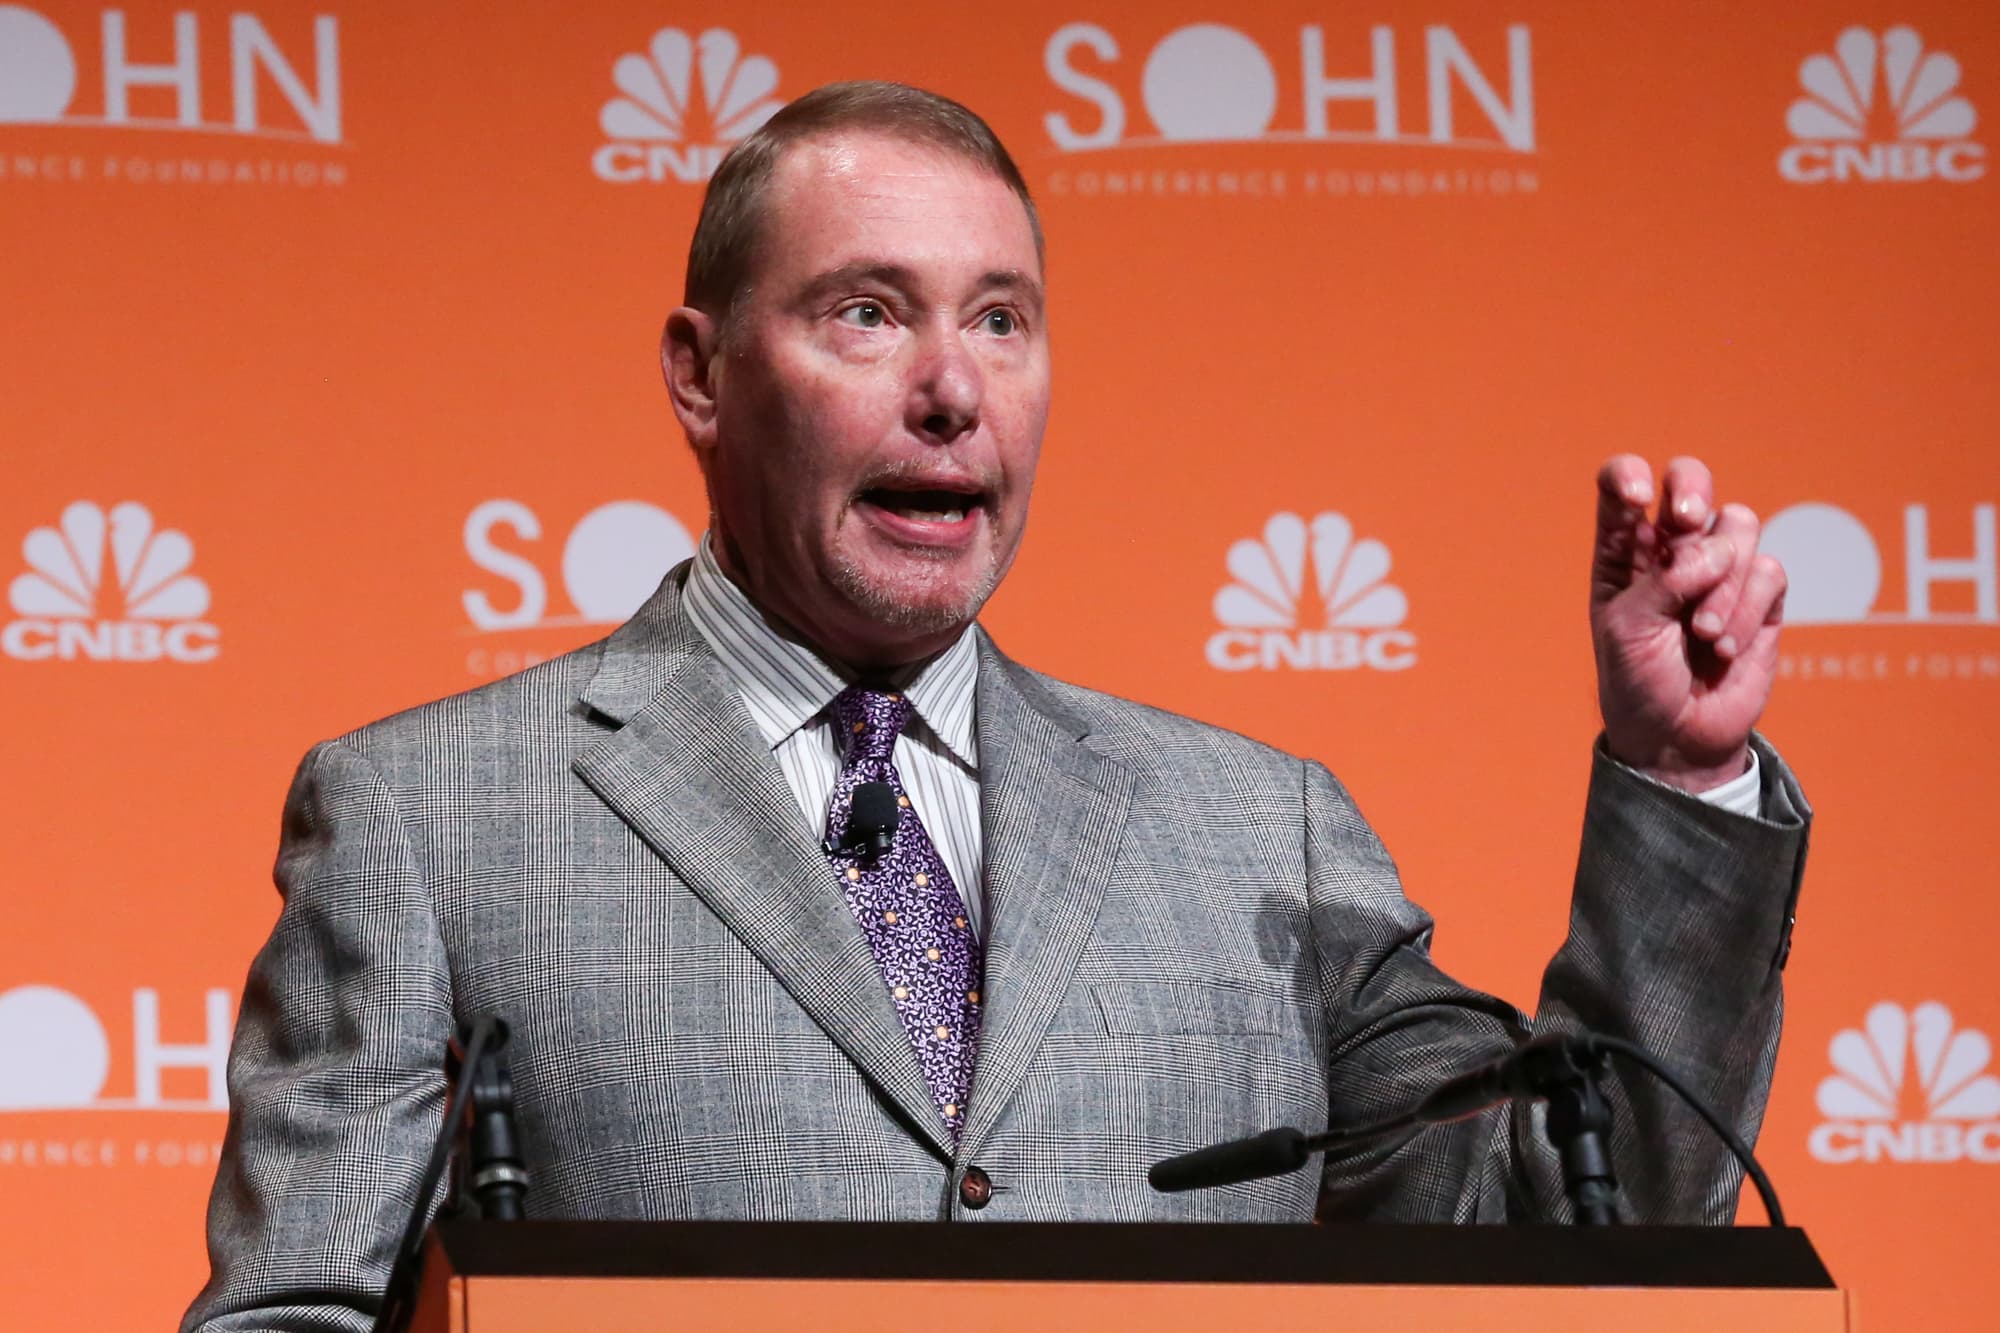 Bond king Gundlach says the Fed should not do more rate hikes after the latest increase